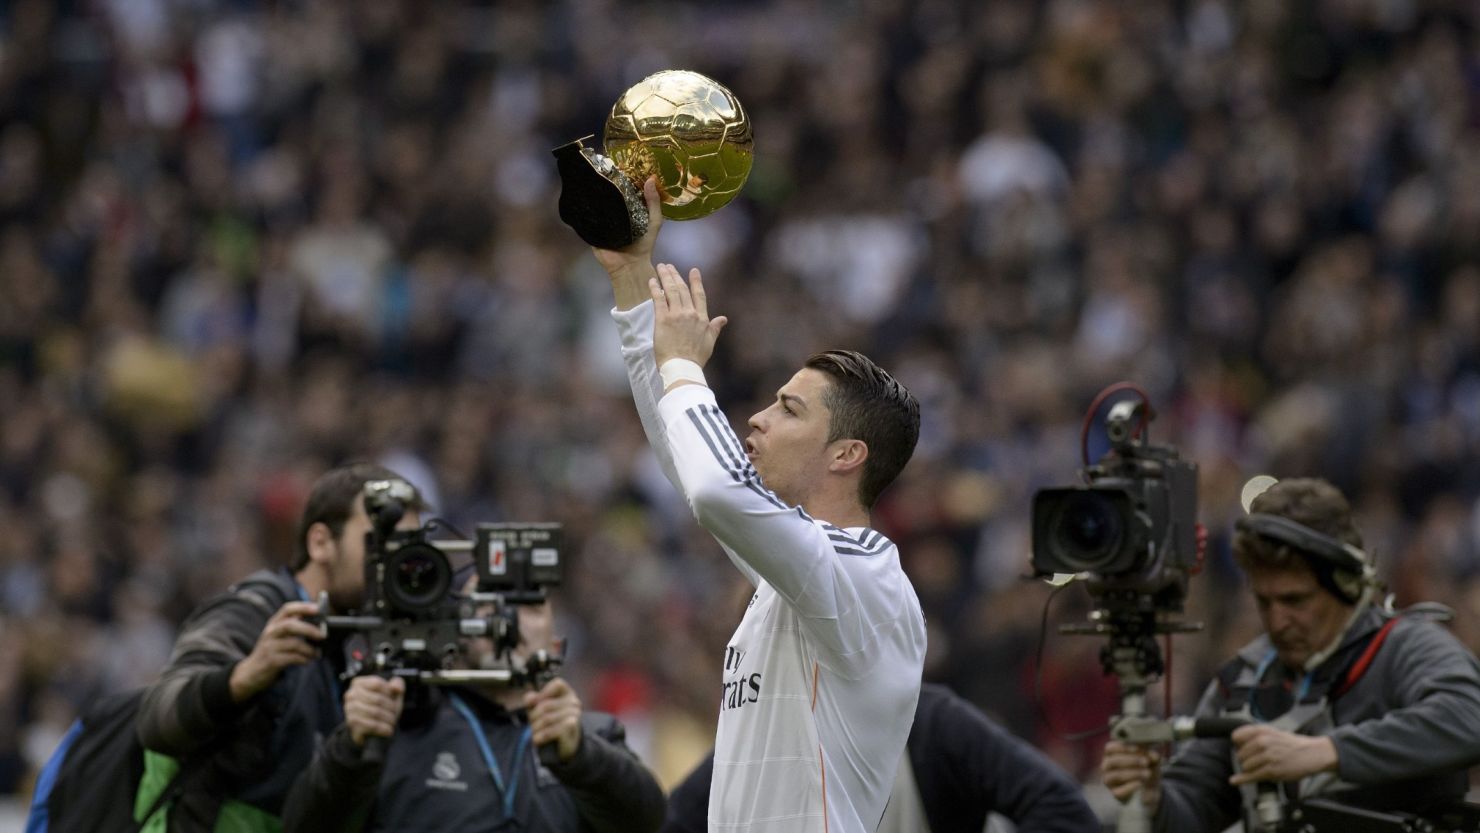 Cristiano Ronaldo shows the FIFA's Ballon d'Or to fans at the Bernabeu before the match against Granada on Saturday.